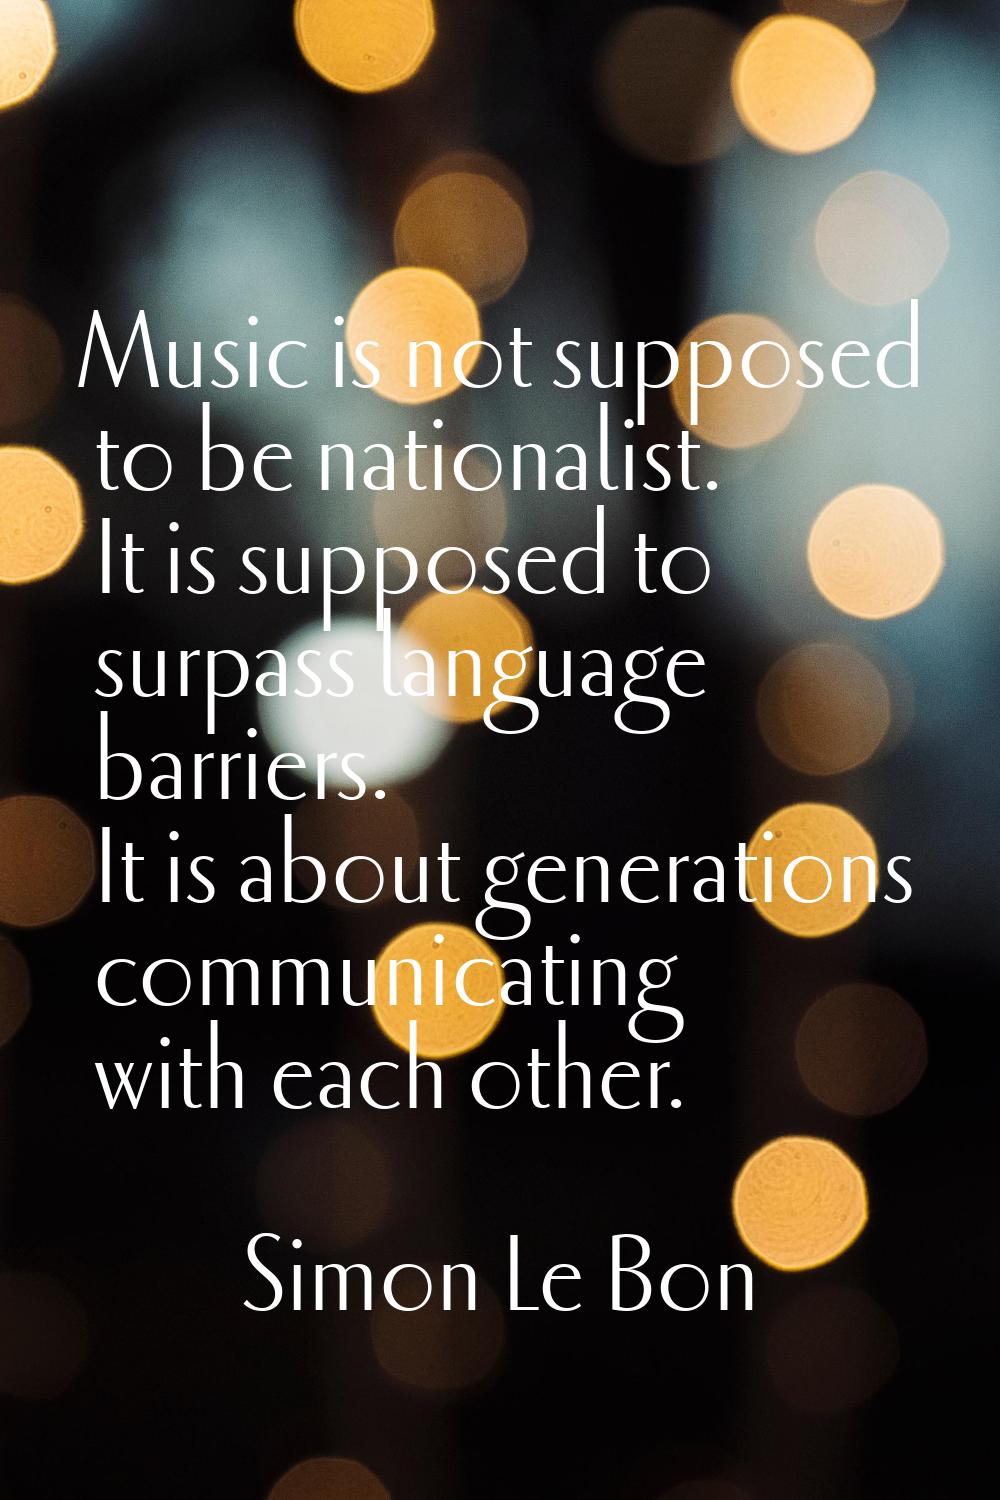 Music is not supposed to be nationalist. It is supposed to surpass language barriers. It is about g